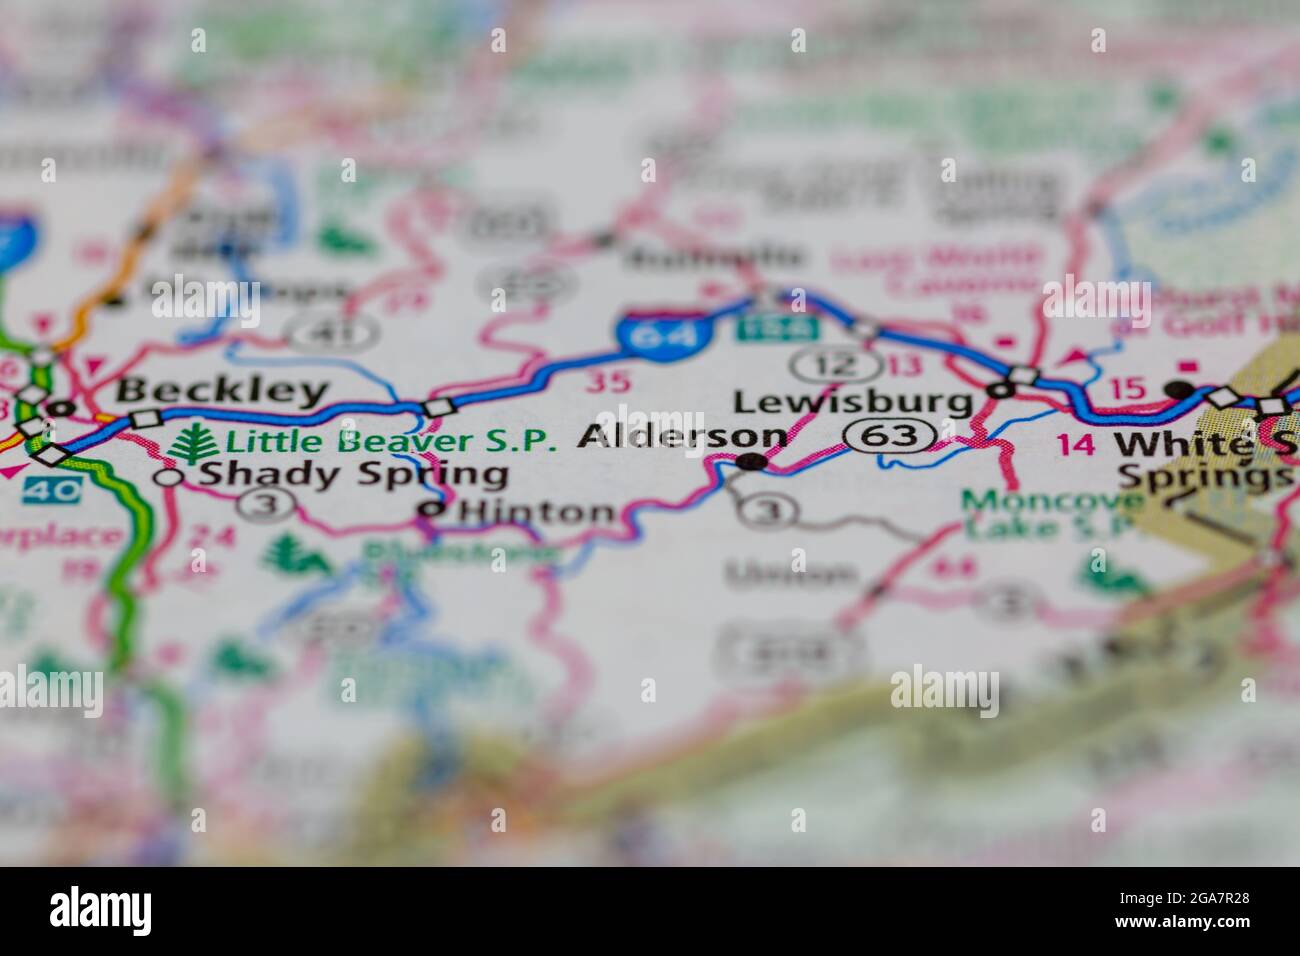 Alderson Virginia shown on a road map or Geography map Stock Photo